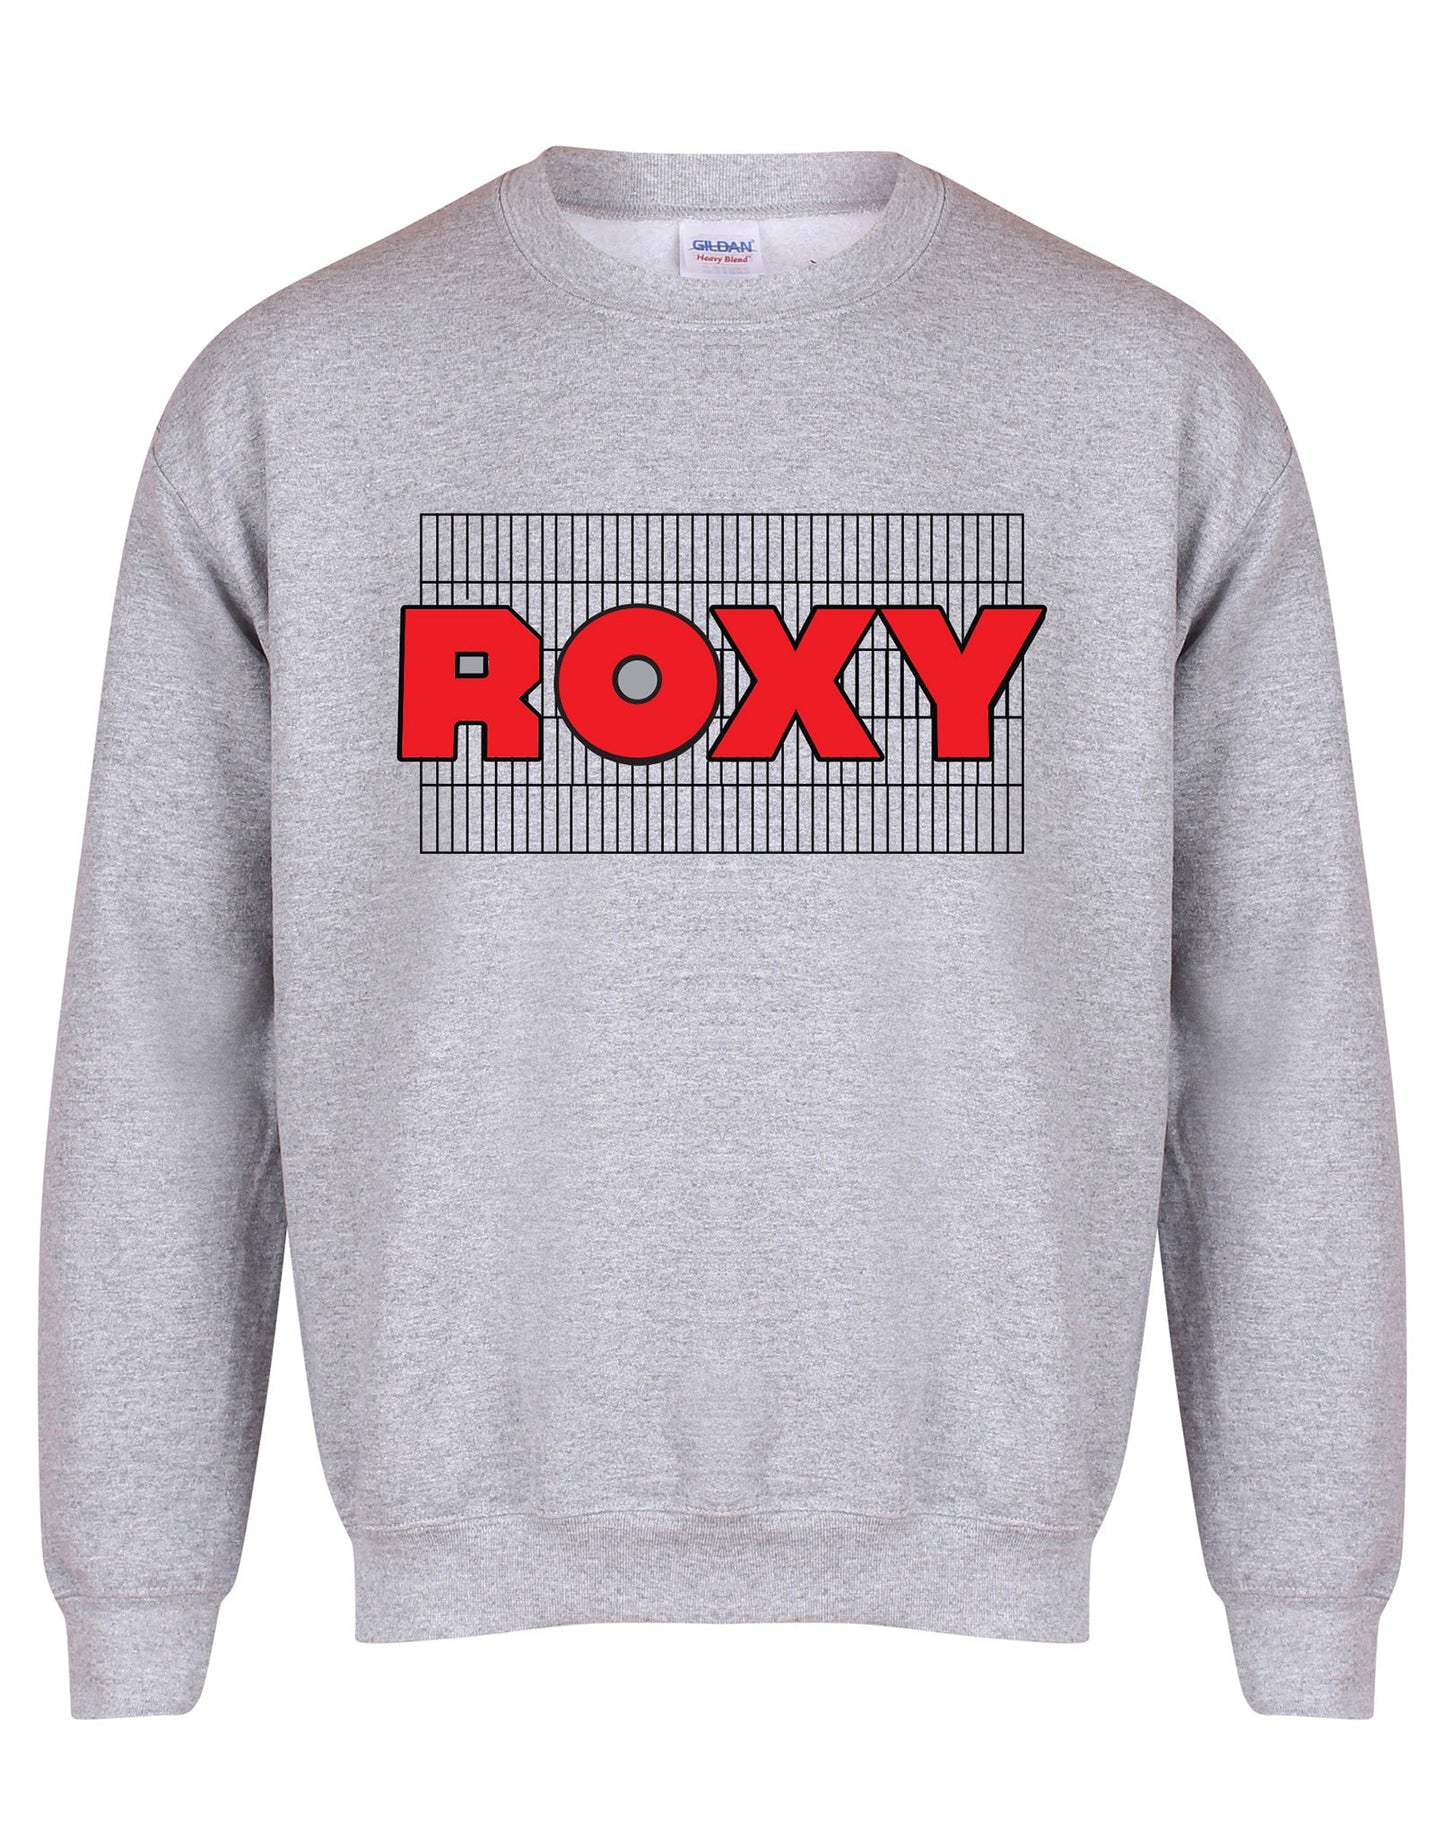 Roxy unisex sweatshirt - various colours - Dirty Stop Outs